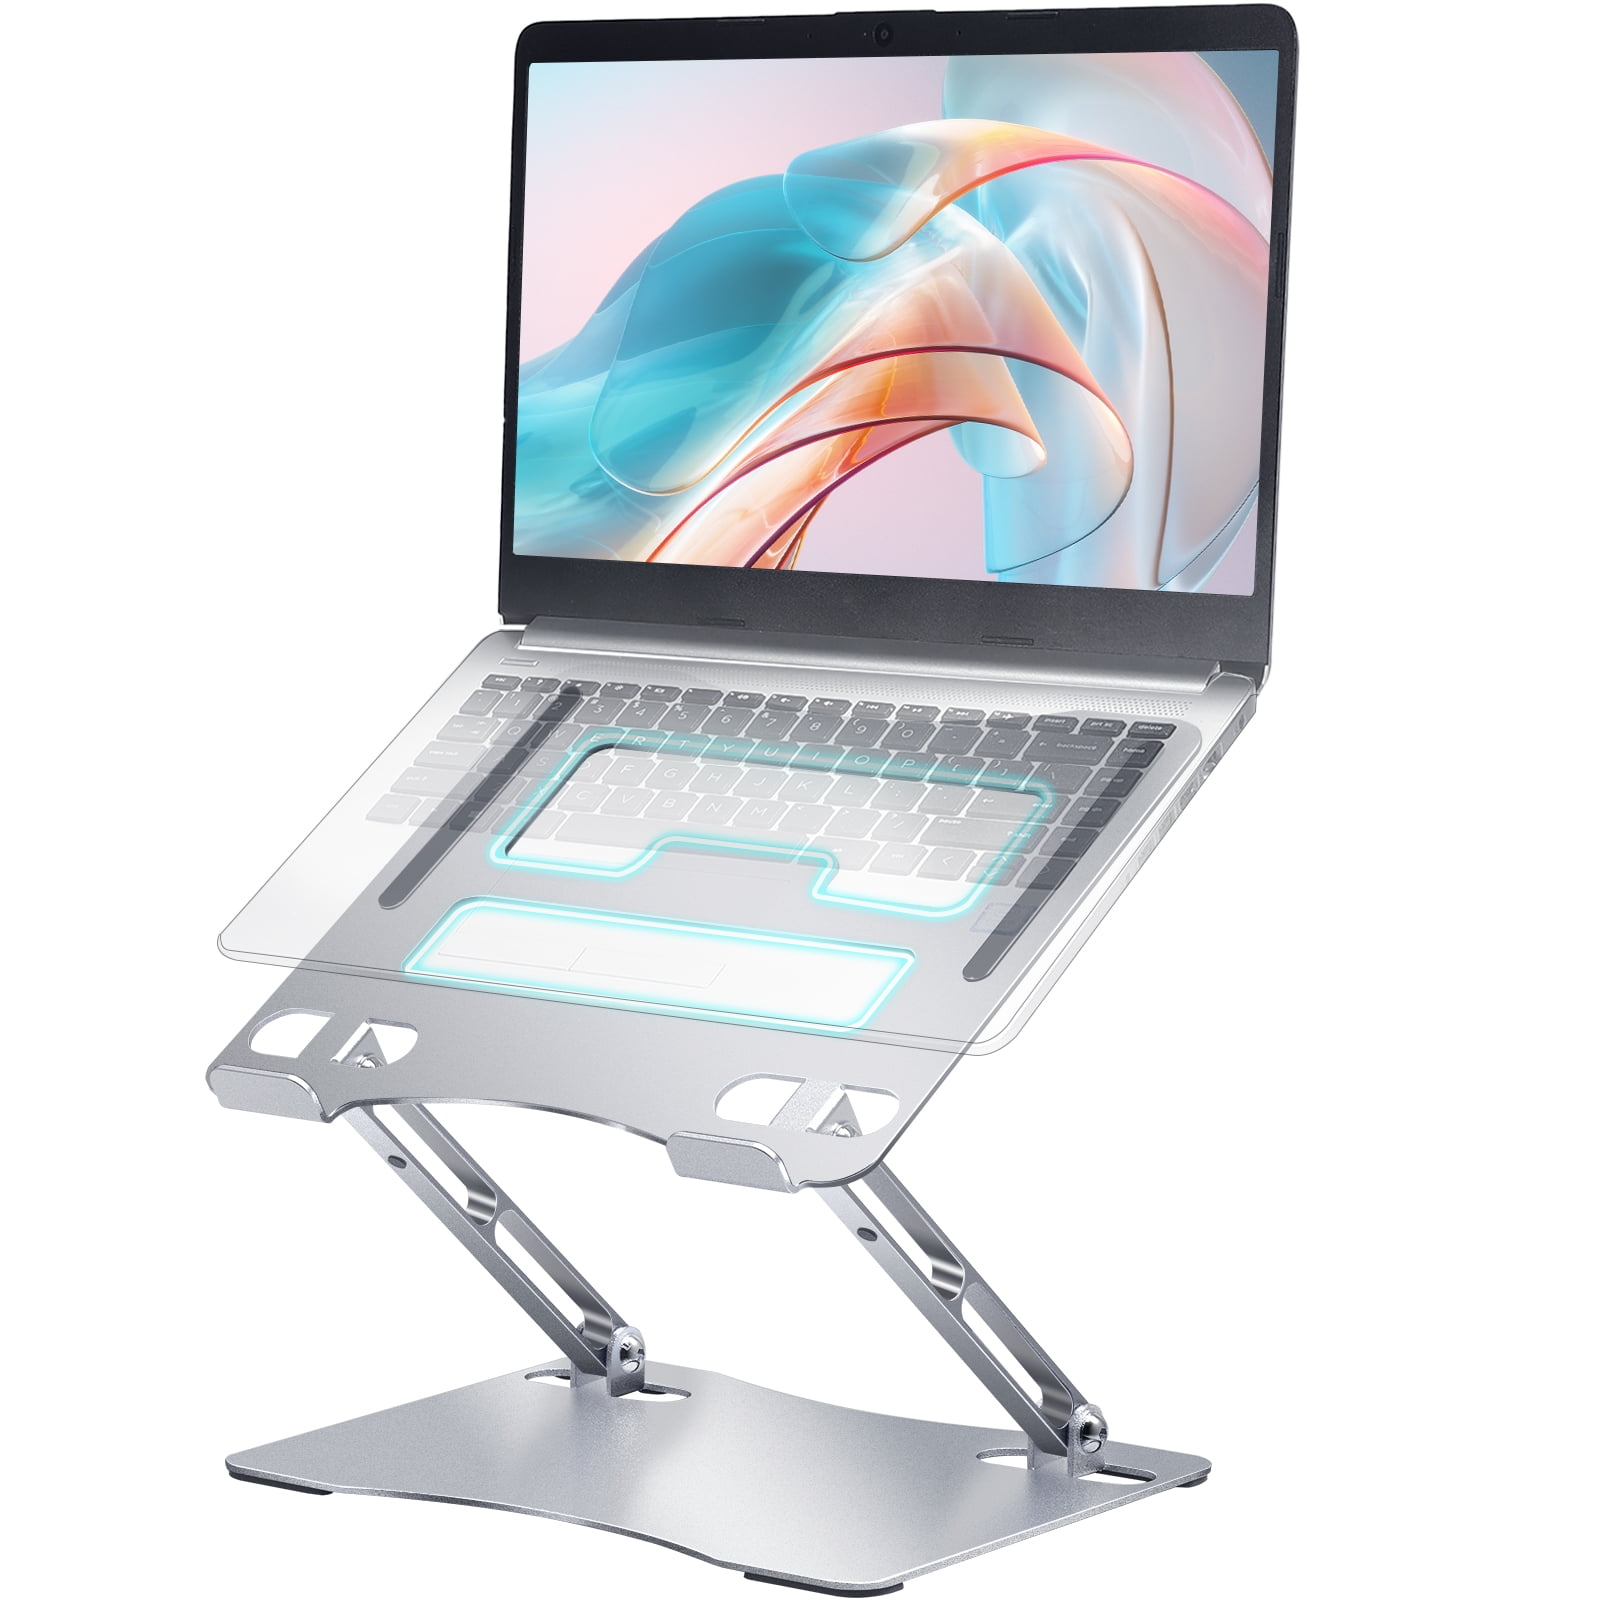  Portable Mini Laptop Riser,Foldable Laptop Cooling Stand,Ergonomic  Keyboard Feet,Adjustable Invisible Lightweight Ventilated Notebook Holder  for MacBook Air Pro 10-17 Inch (2 Pack) : Electronics